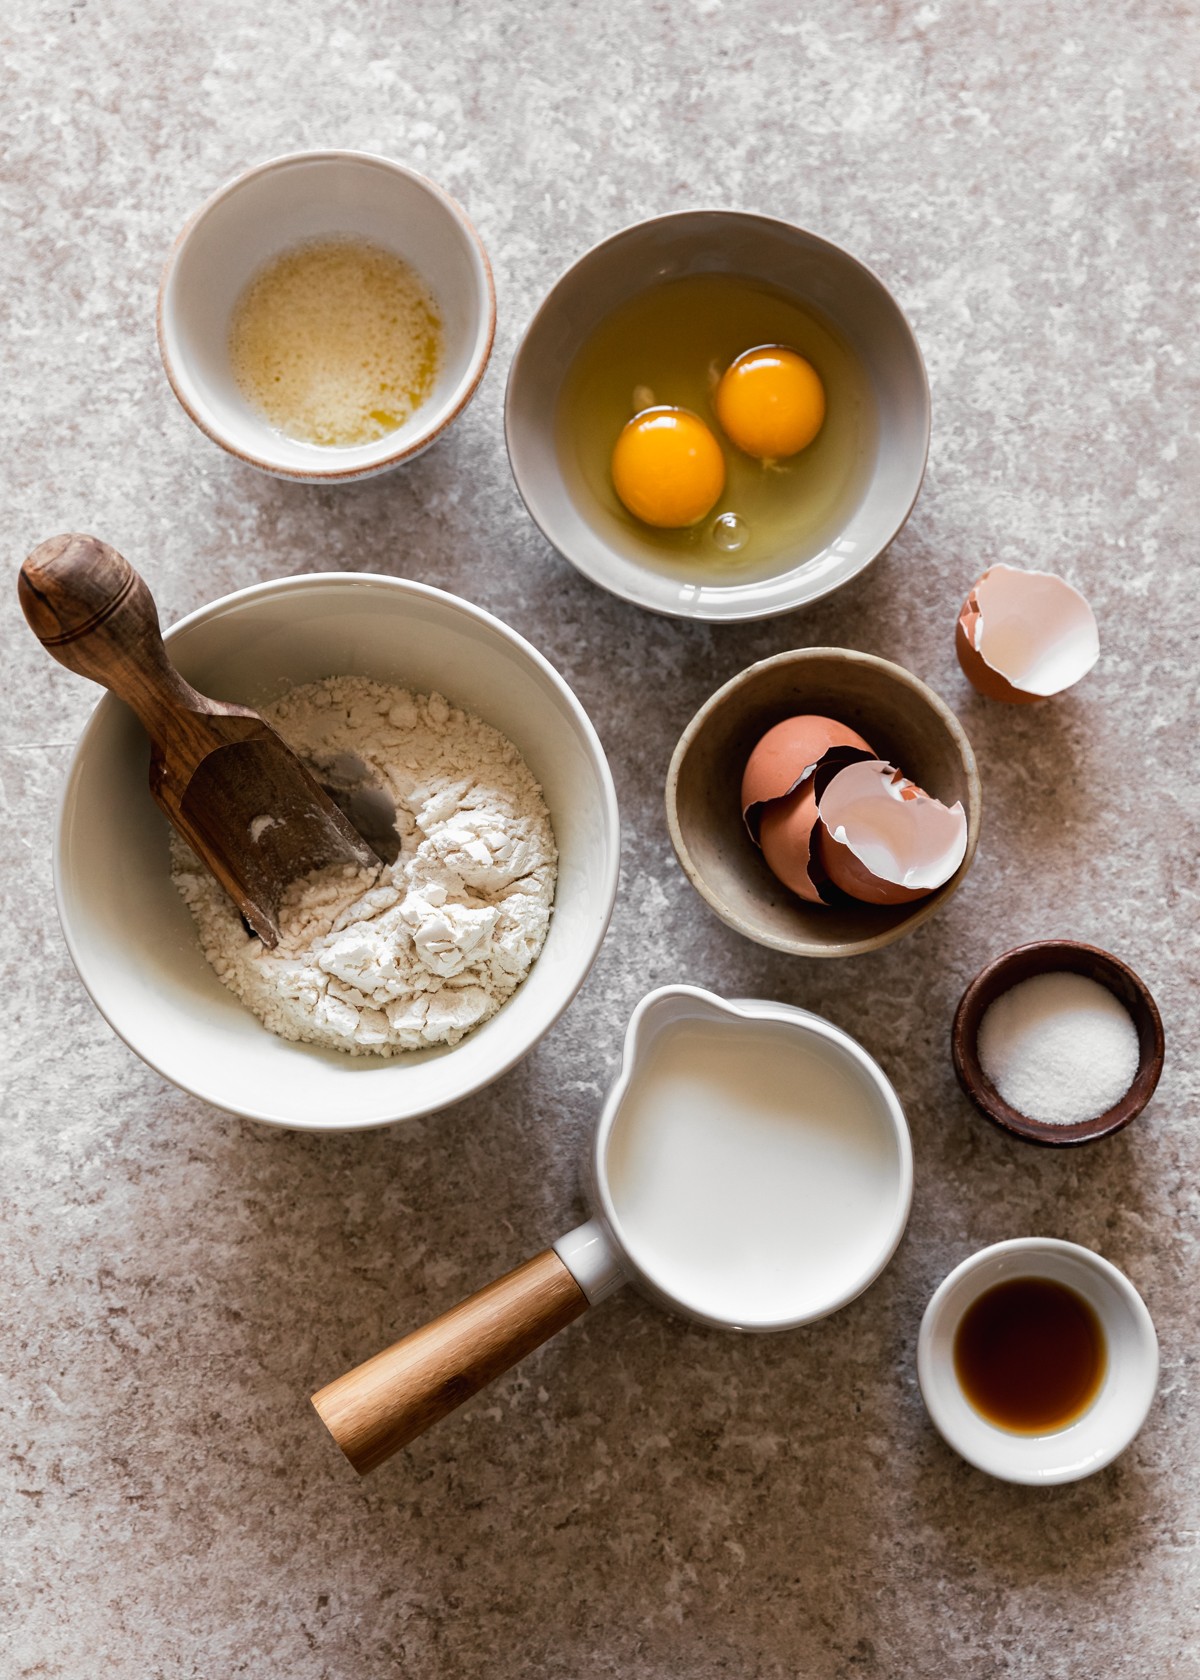 An overhead image of a white bowl of flour with a wood scoop, a cream bowl of egg shells, a white cup of milk, a wood bowl of salt, a beige bowl of eggs, and a white bowl of melted butter on a beige counter.